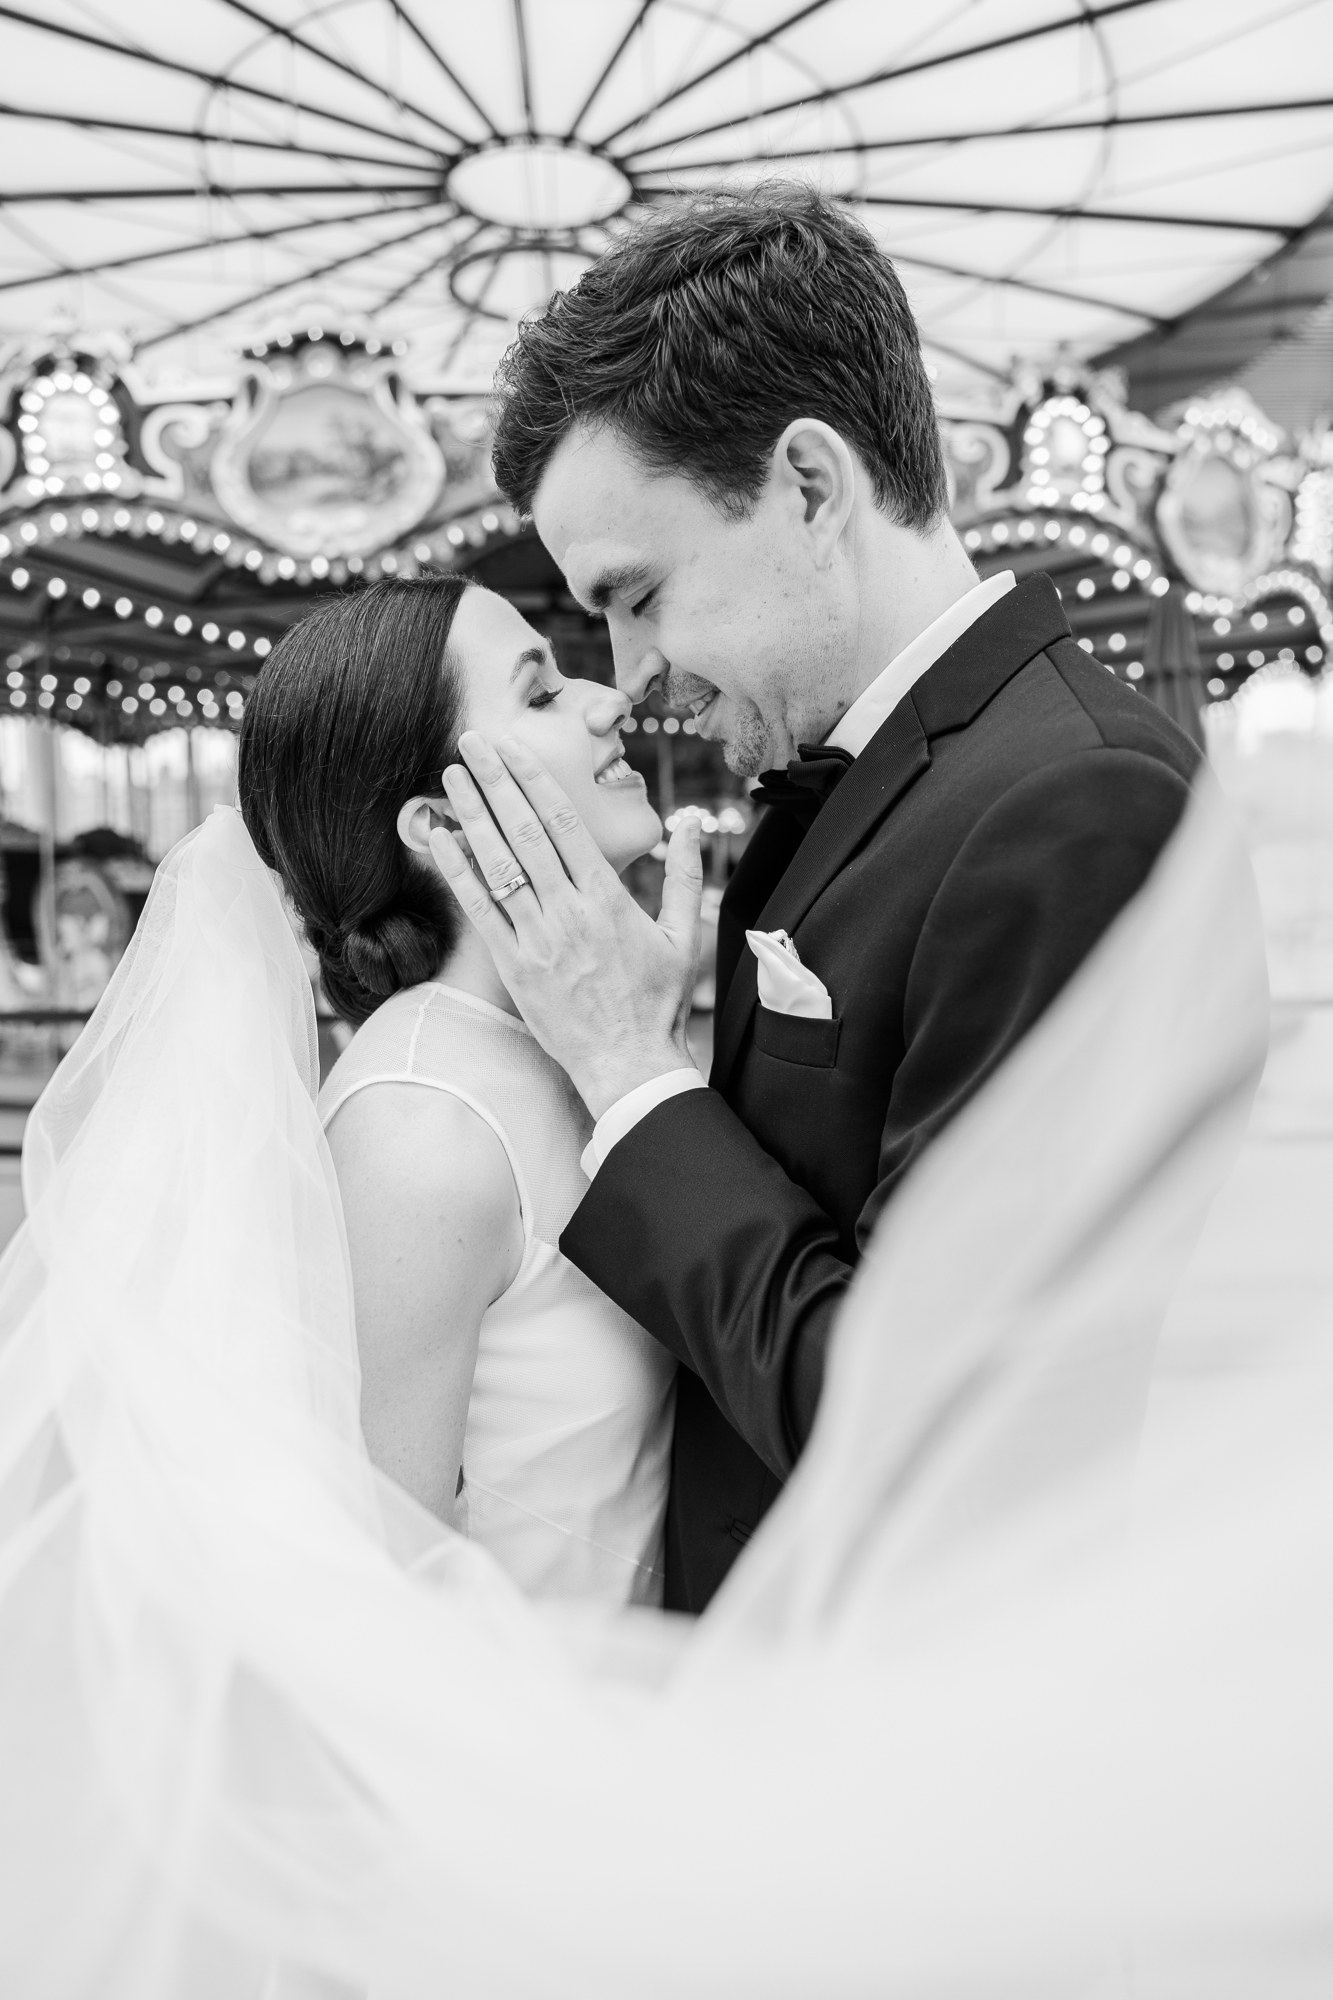 Flawless DUMBO, Brooklyn Wedding Photos at Smack Mellon and Jane's Carousel